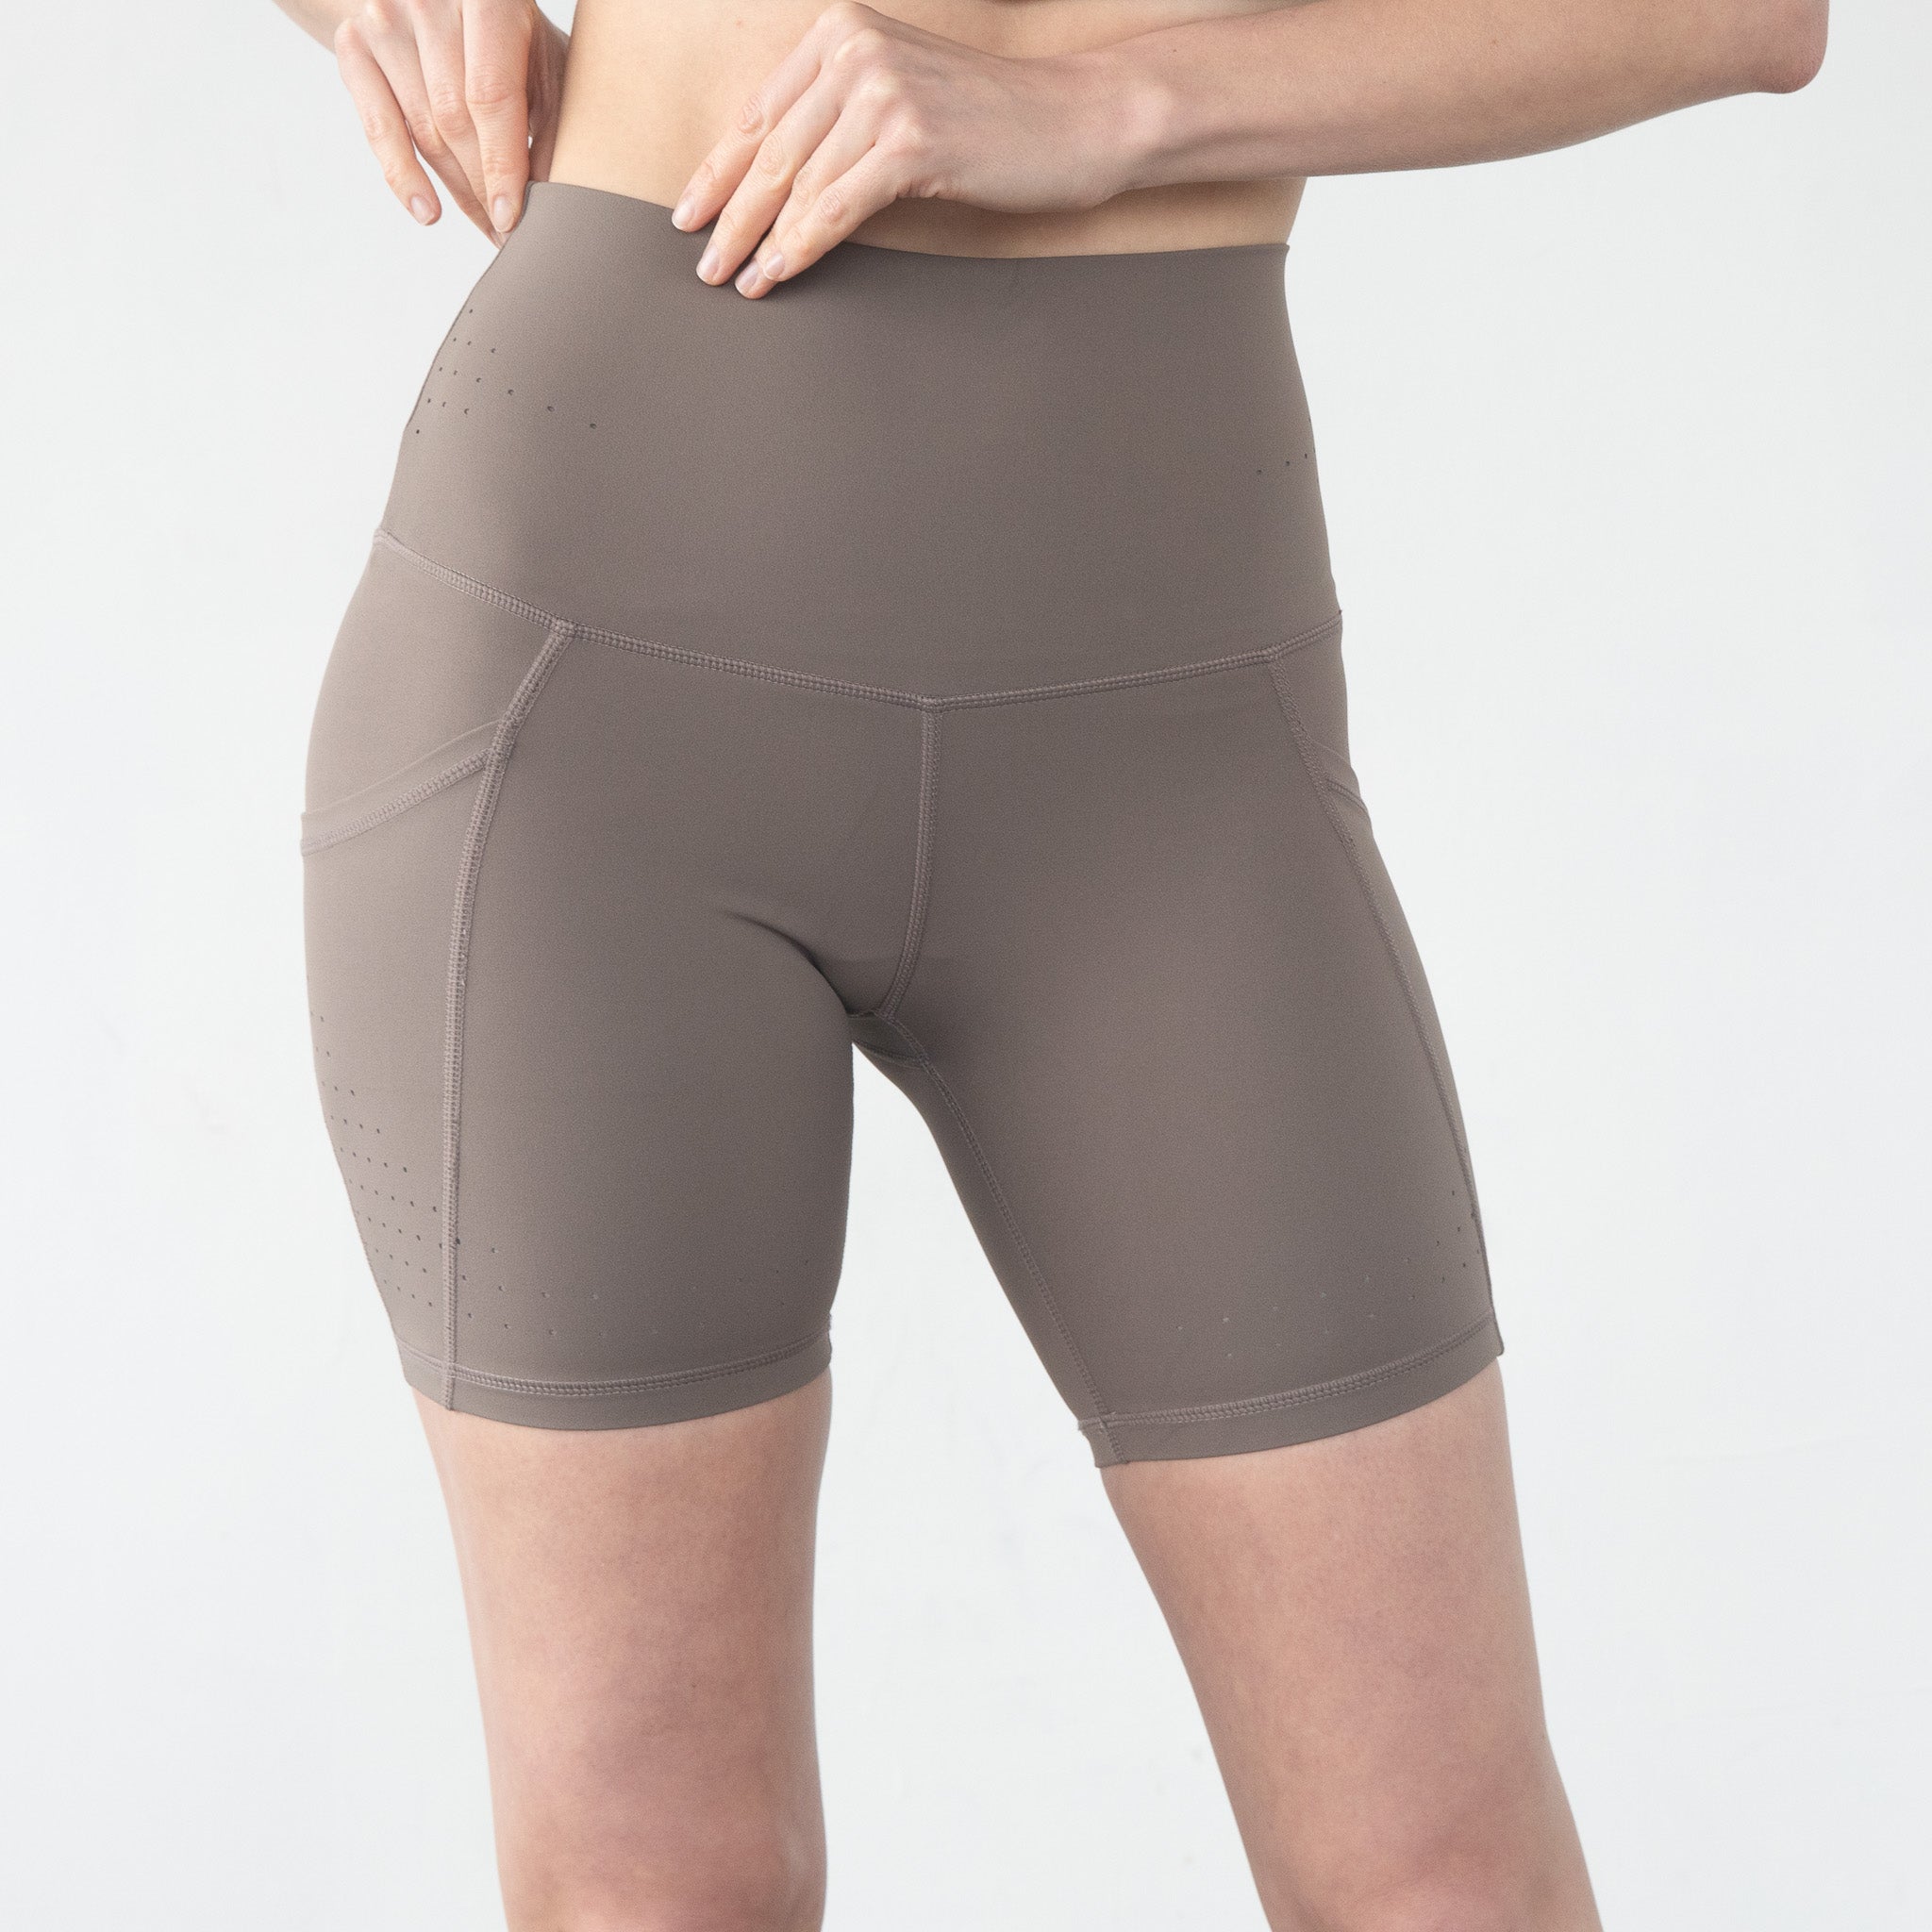 Postpartum Compression: How Tight Should It Be?